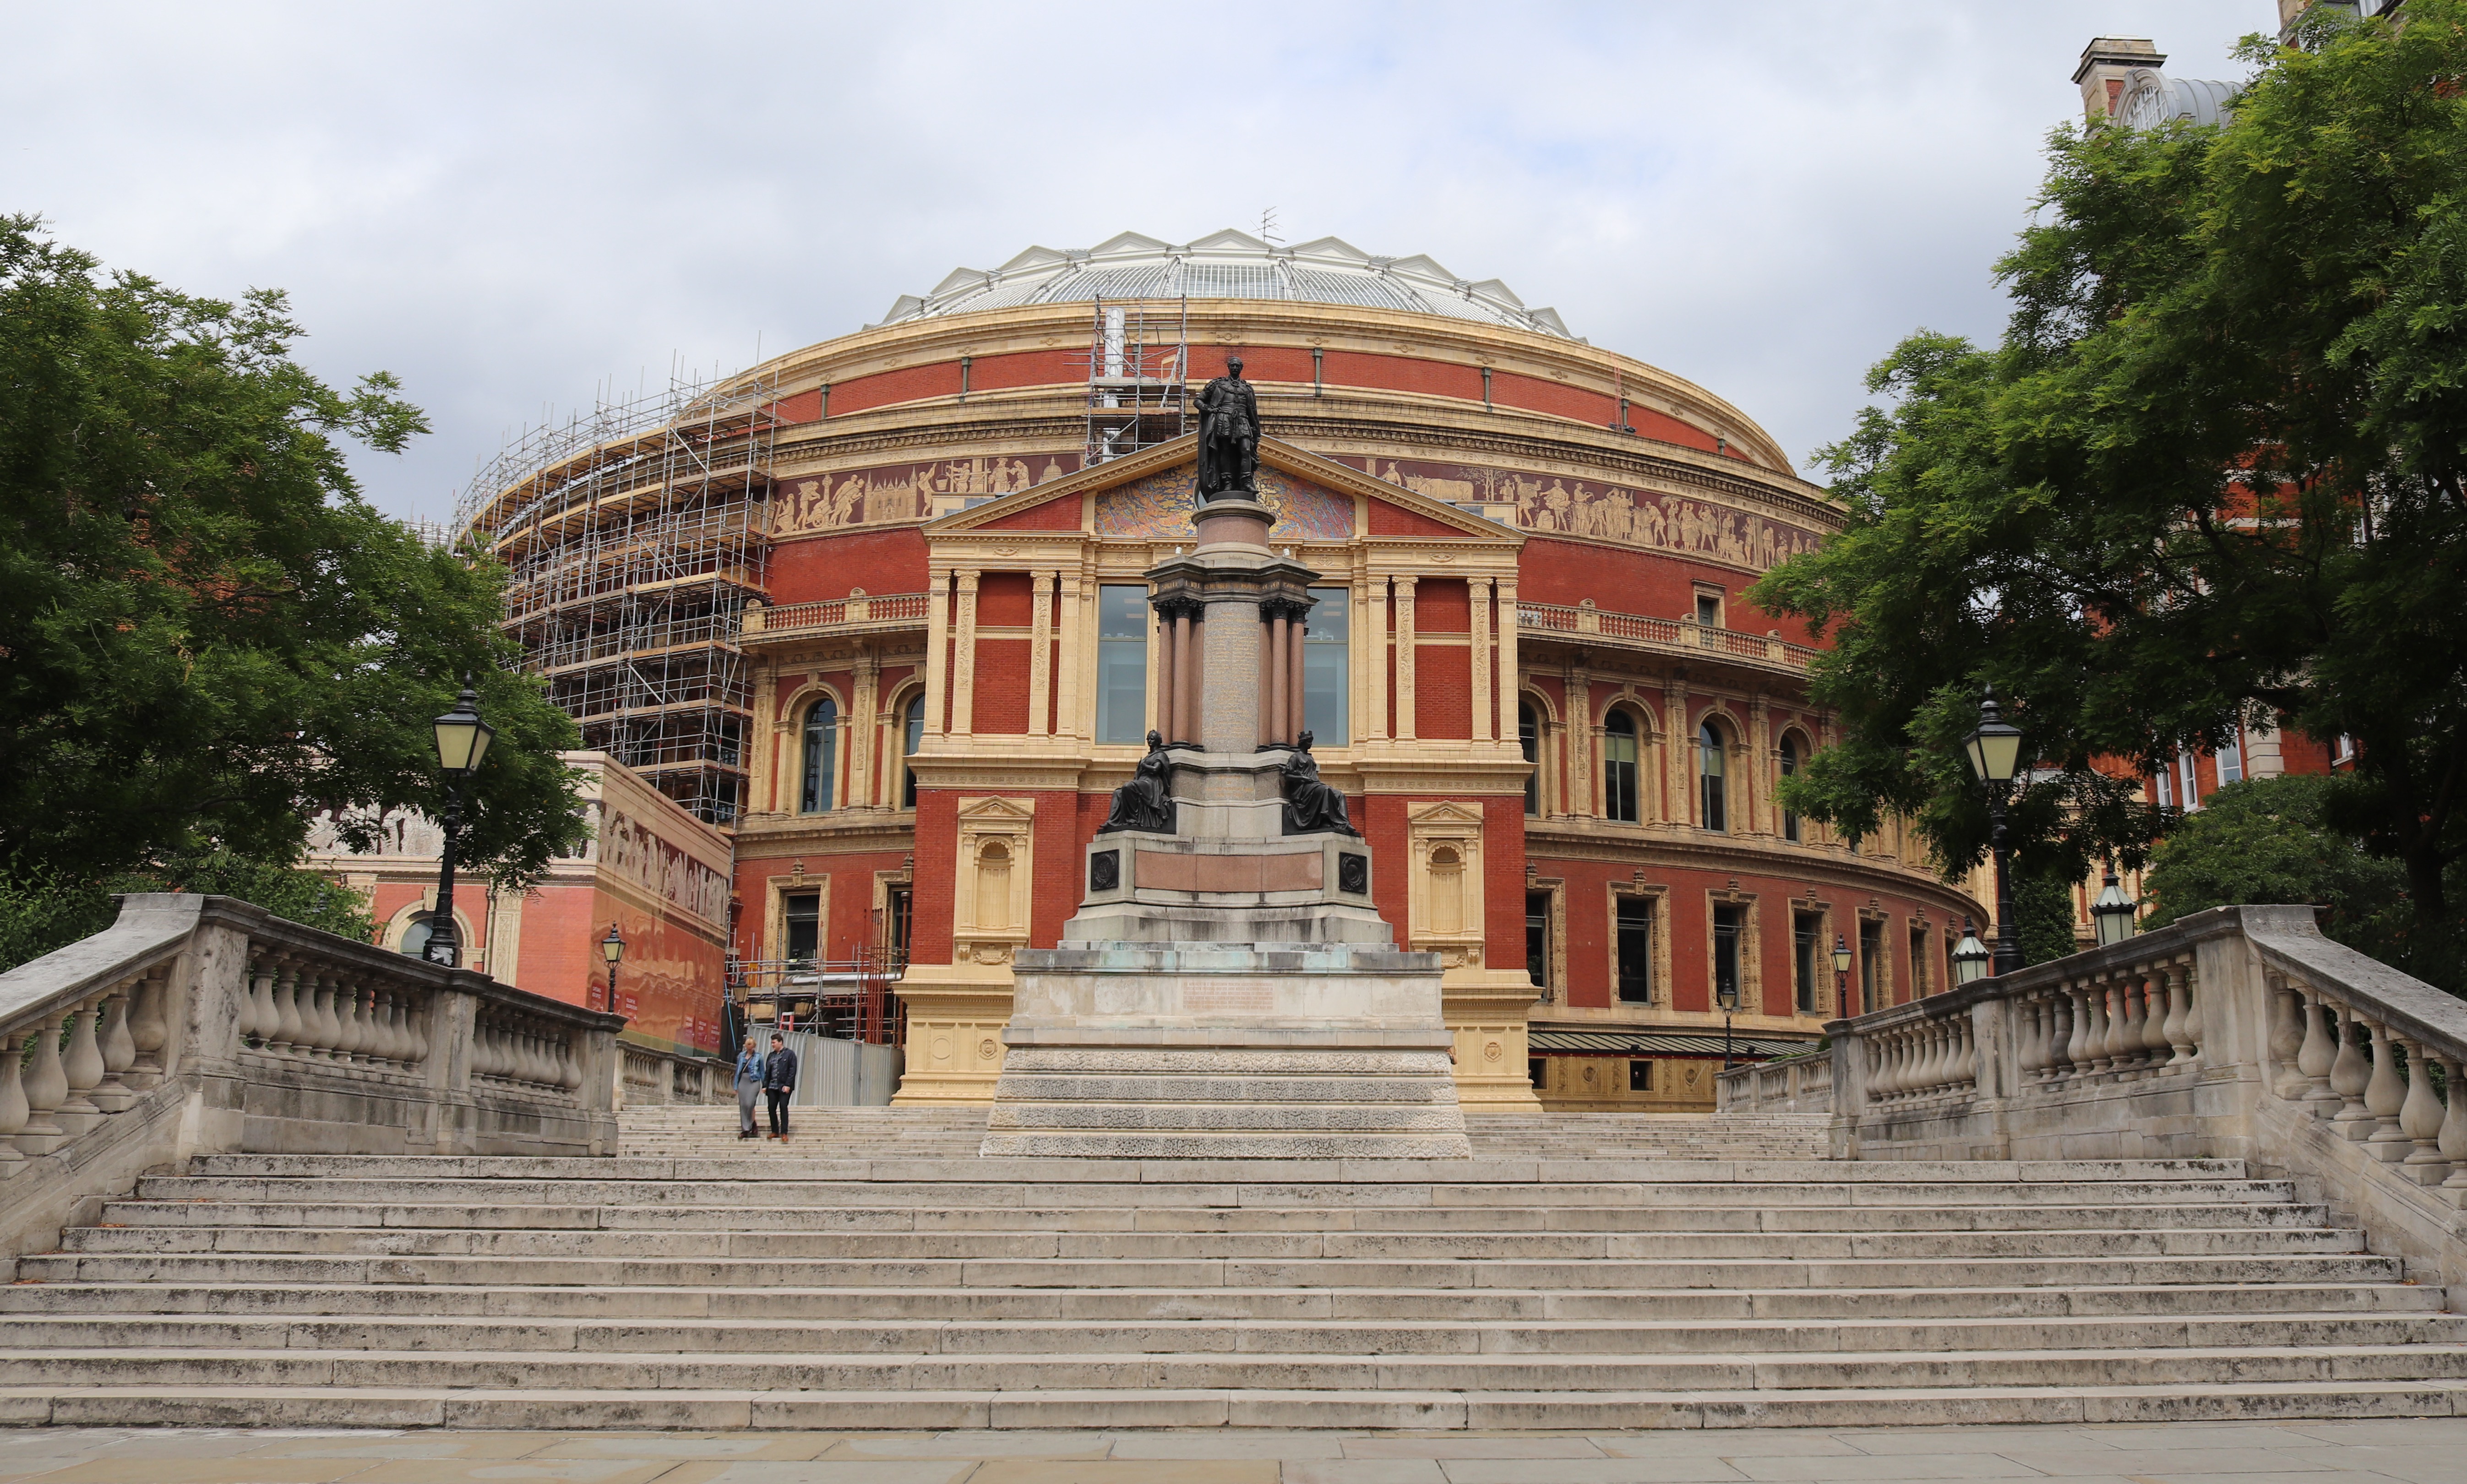 View of Royal Albert Hall from the Diamond Jubilee Steps